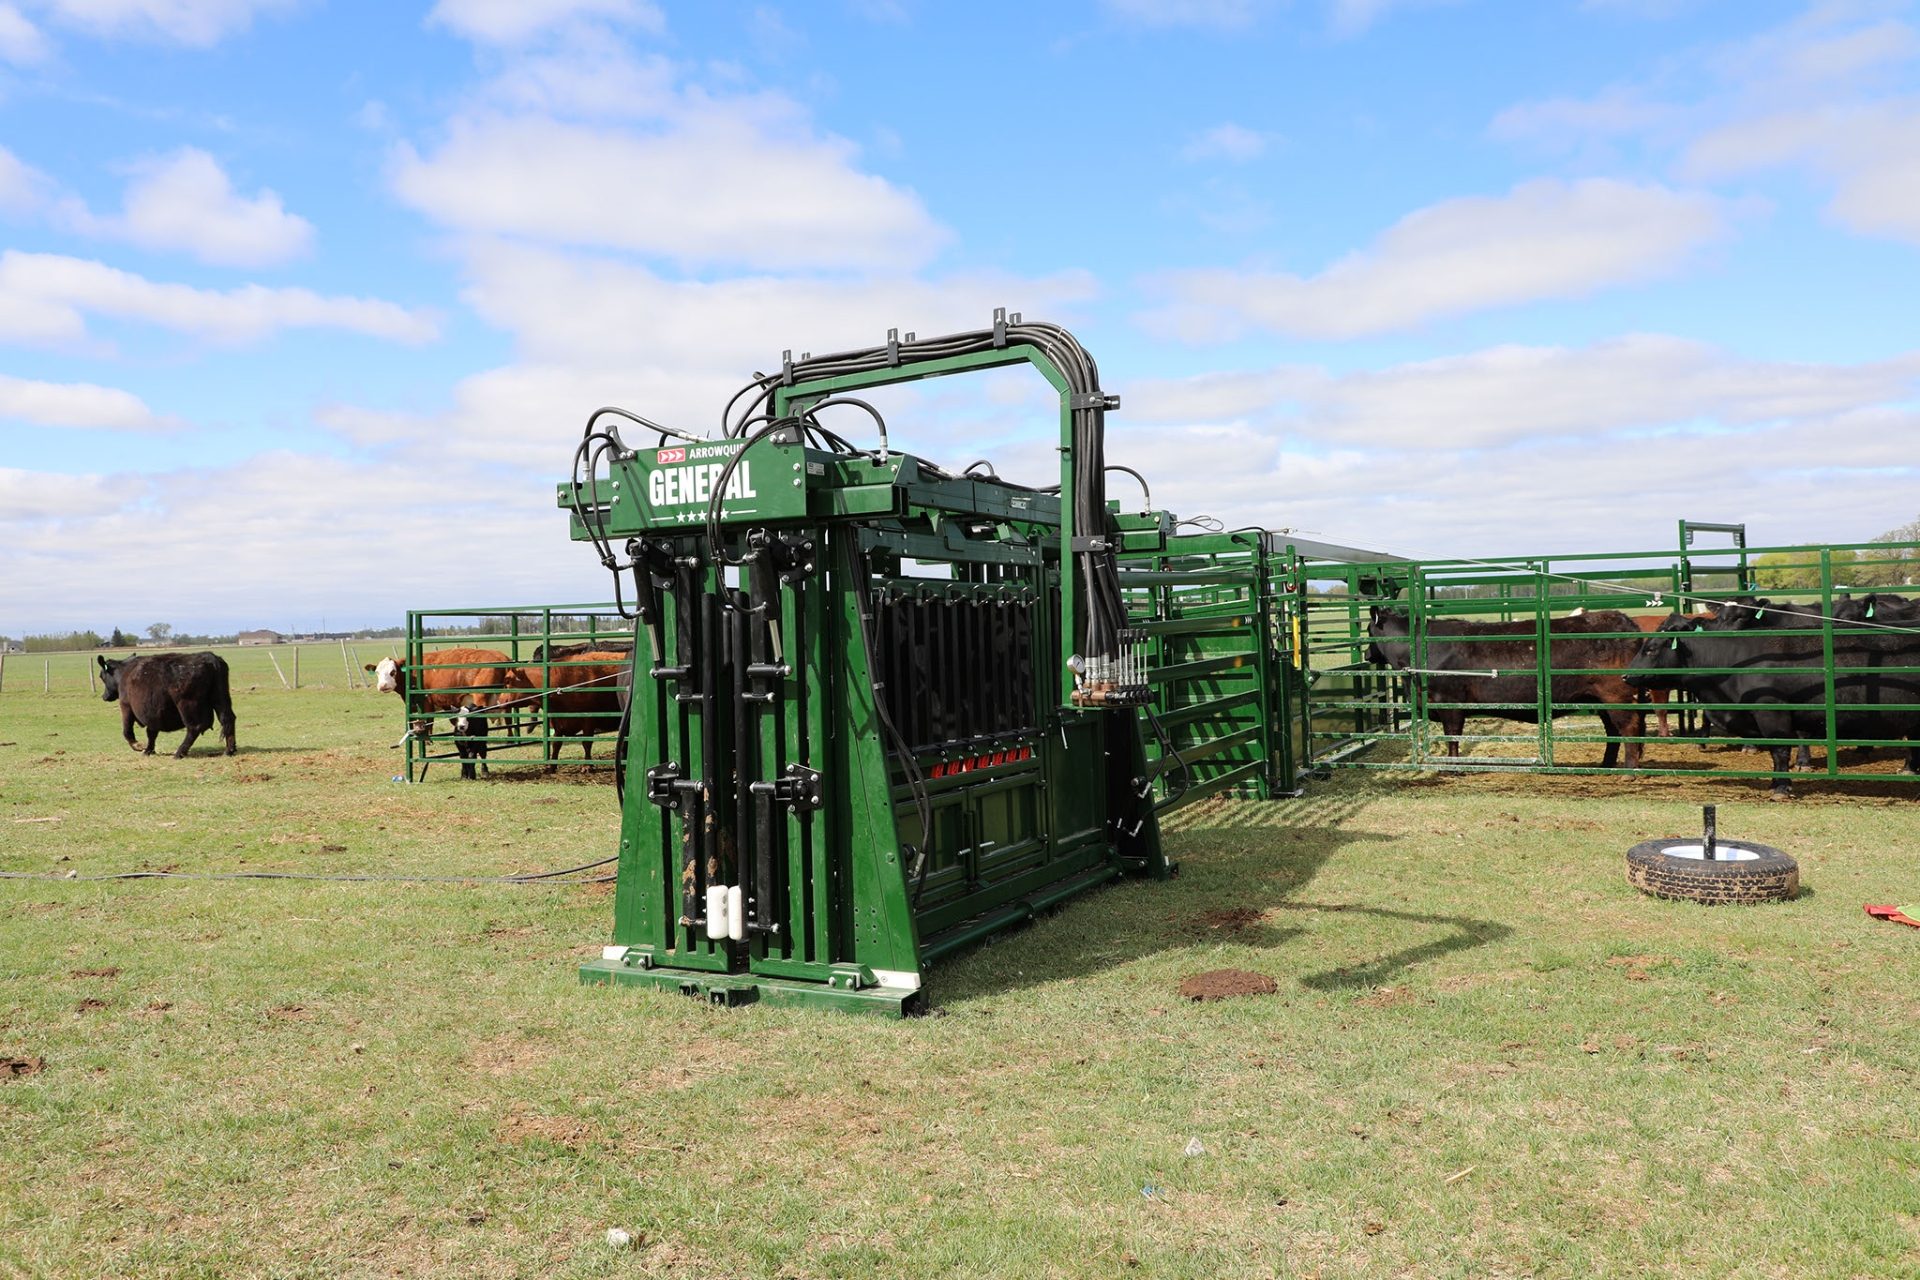 The General Hydraulic Chute in a pasture with cattle enclosed in pens behind